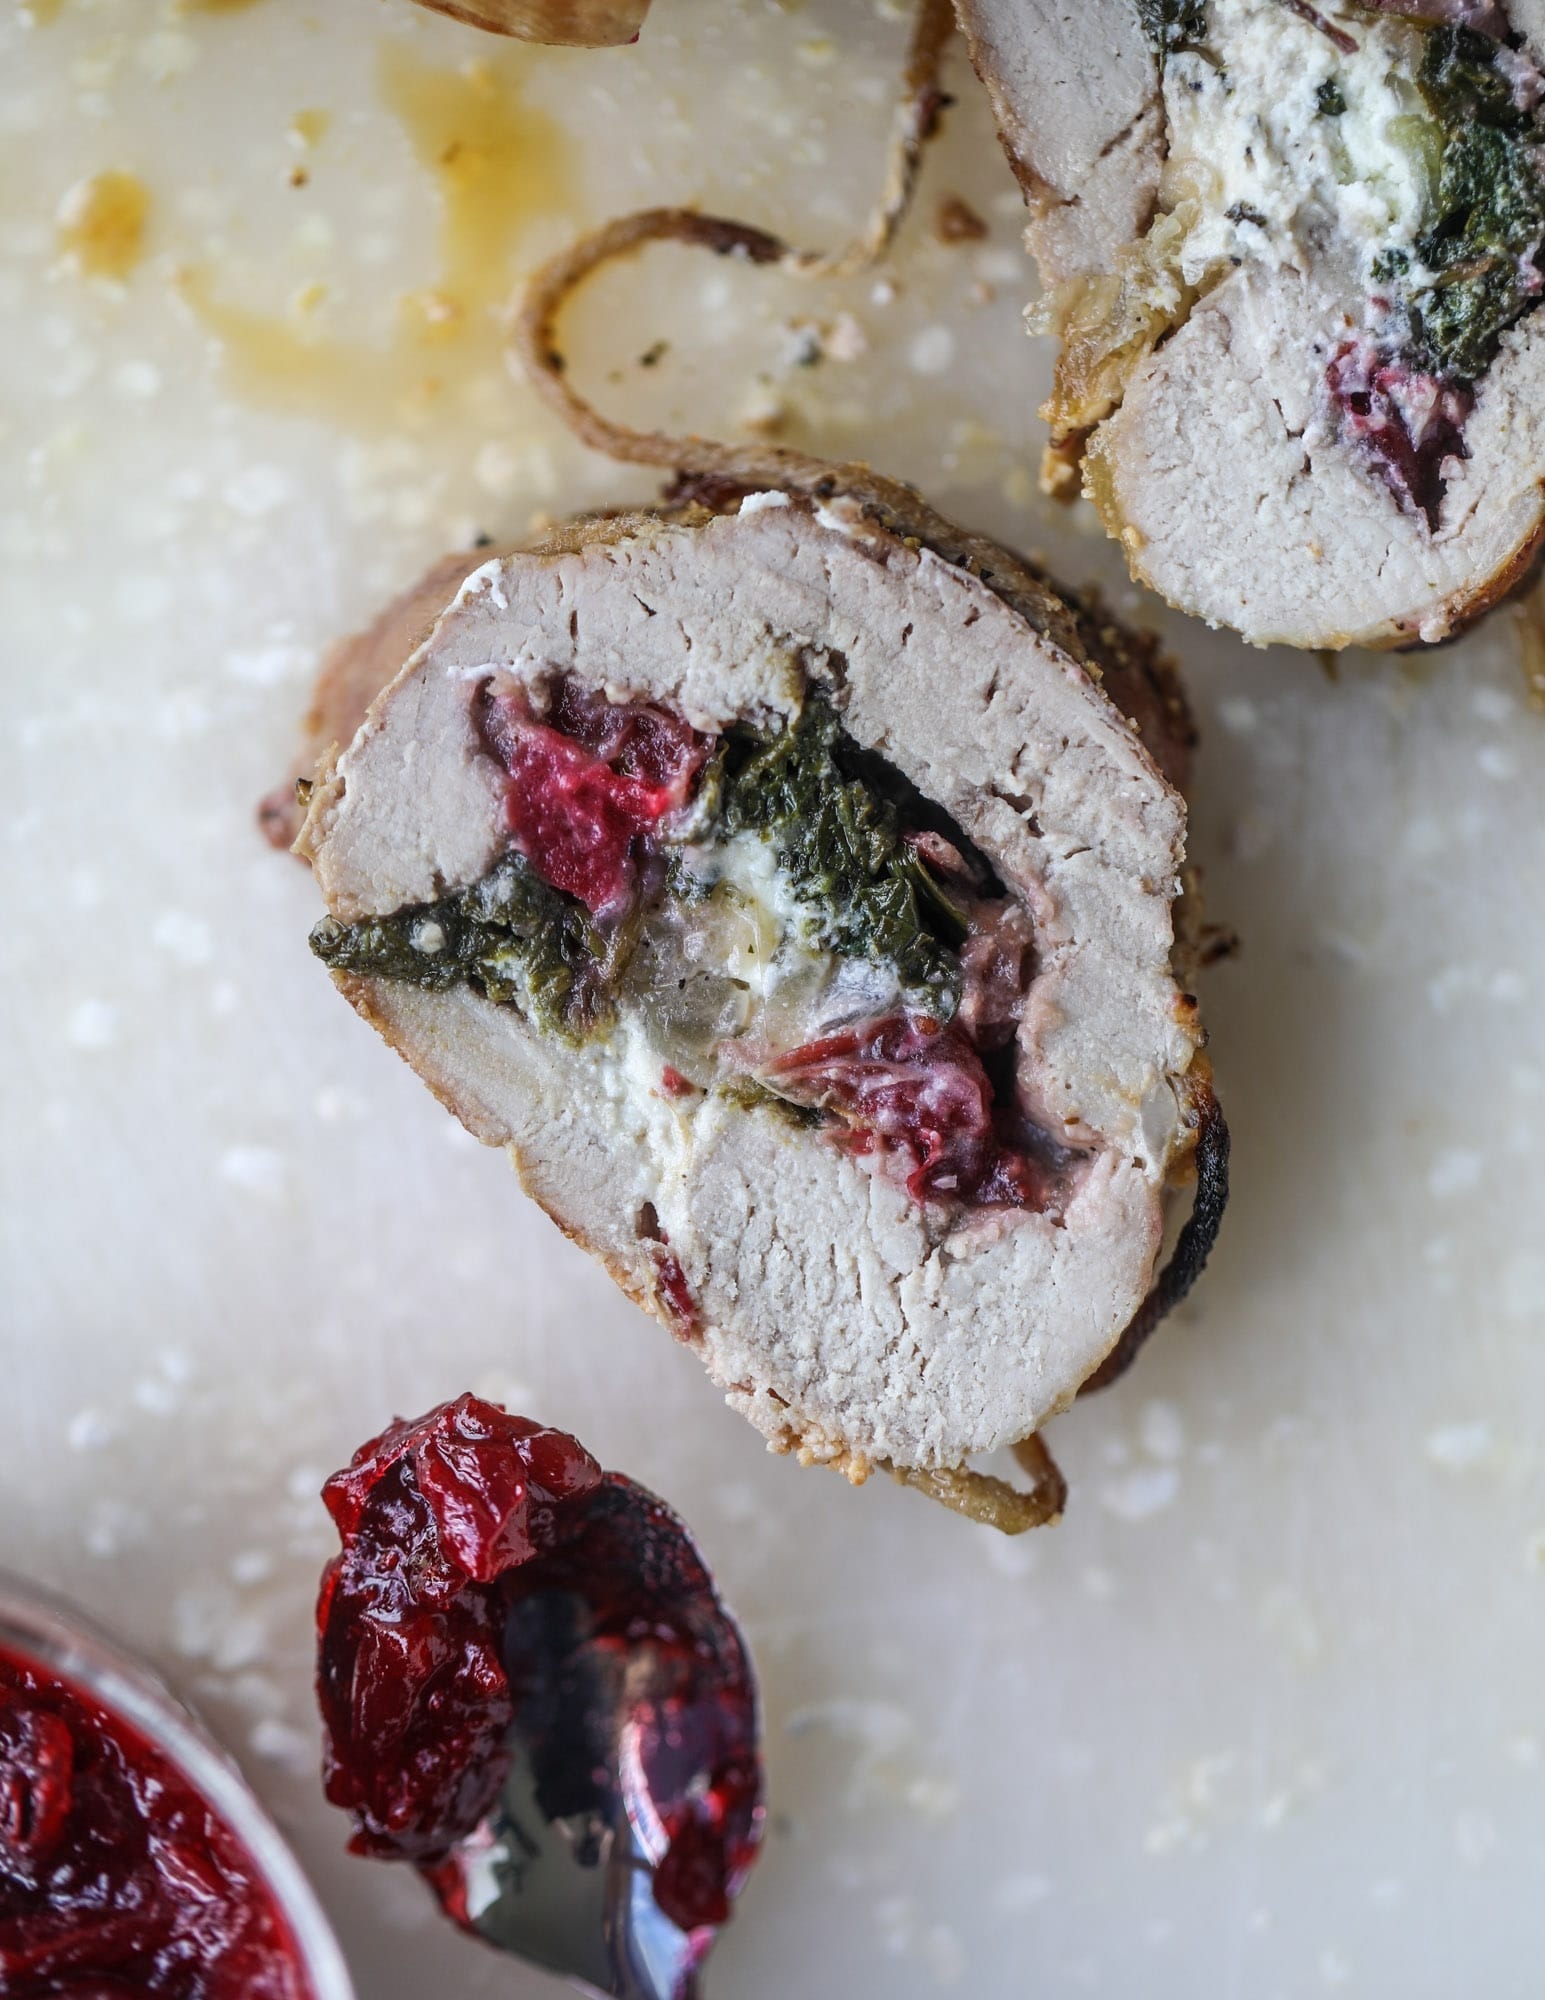 Stuffed pork tenderloin filled with caramelized onion, fresh cranberry sauce, goat cheese and fresh spinach.